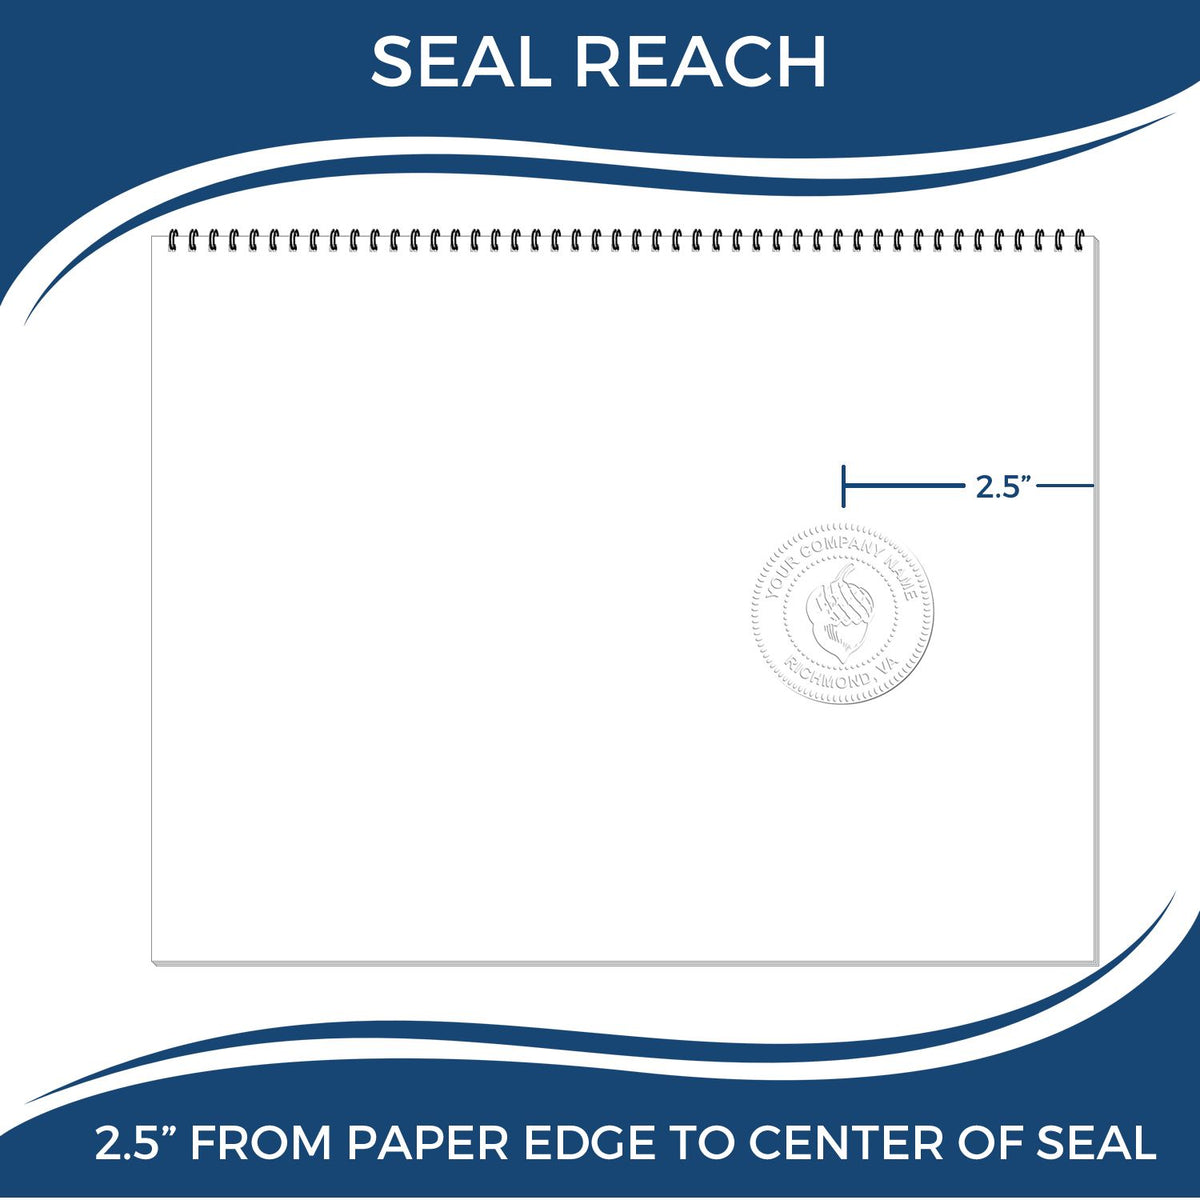 An infographic showing the seal reach which is represented by a ruler and a miniature seal image of the Heavy Duty Cast Iron Louisiana Geologist Seal Embosser